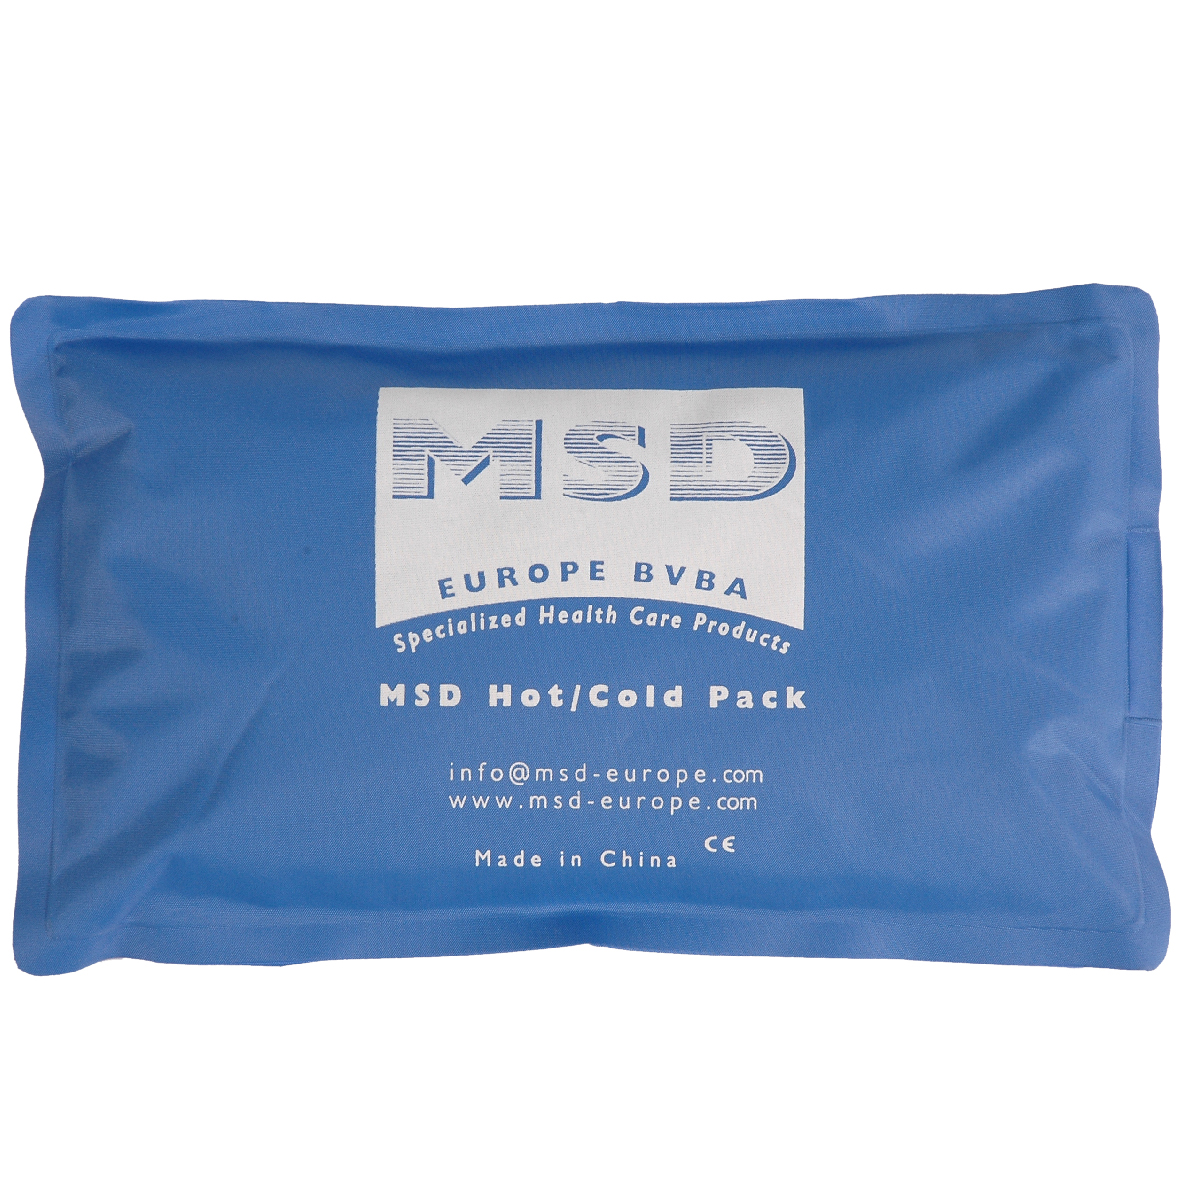 Msd GEL Non-toxic COLD-HOT 20x30 cm NYLON BLAU Ice hot hot COLD PACK 